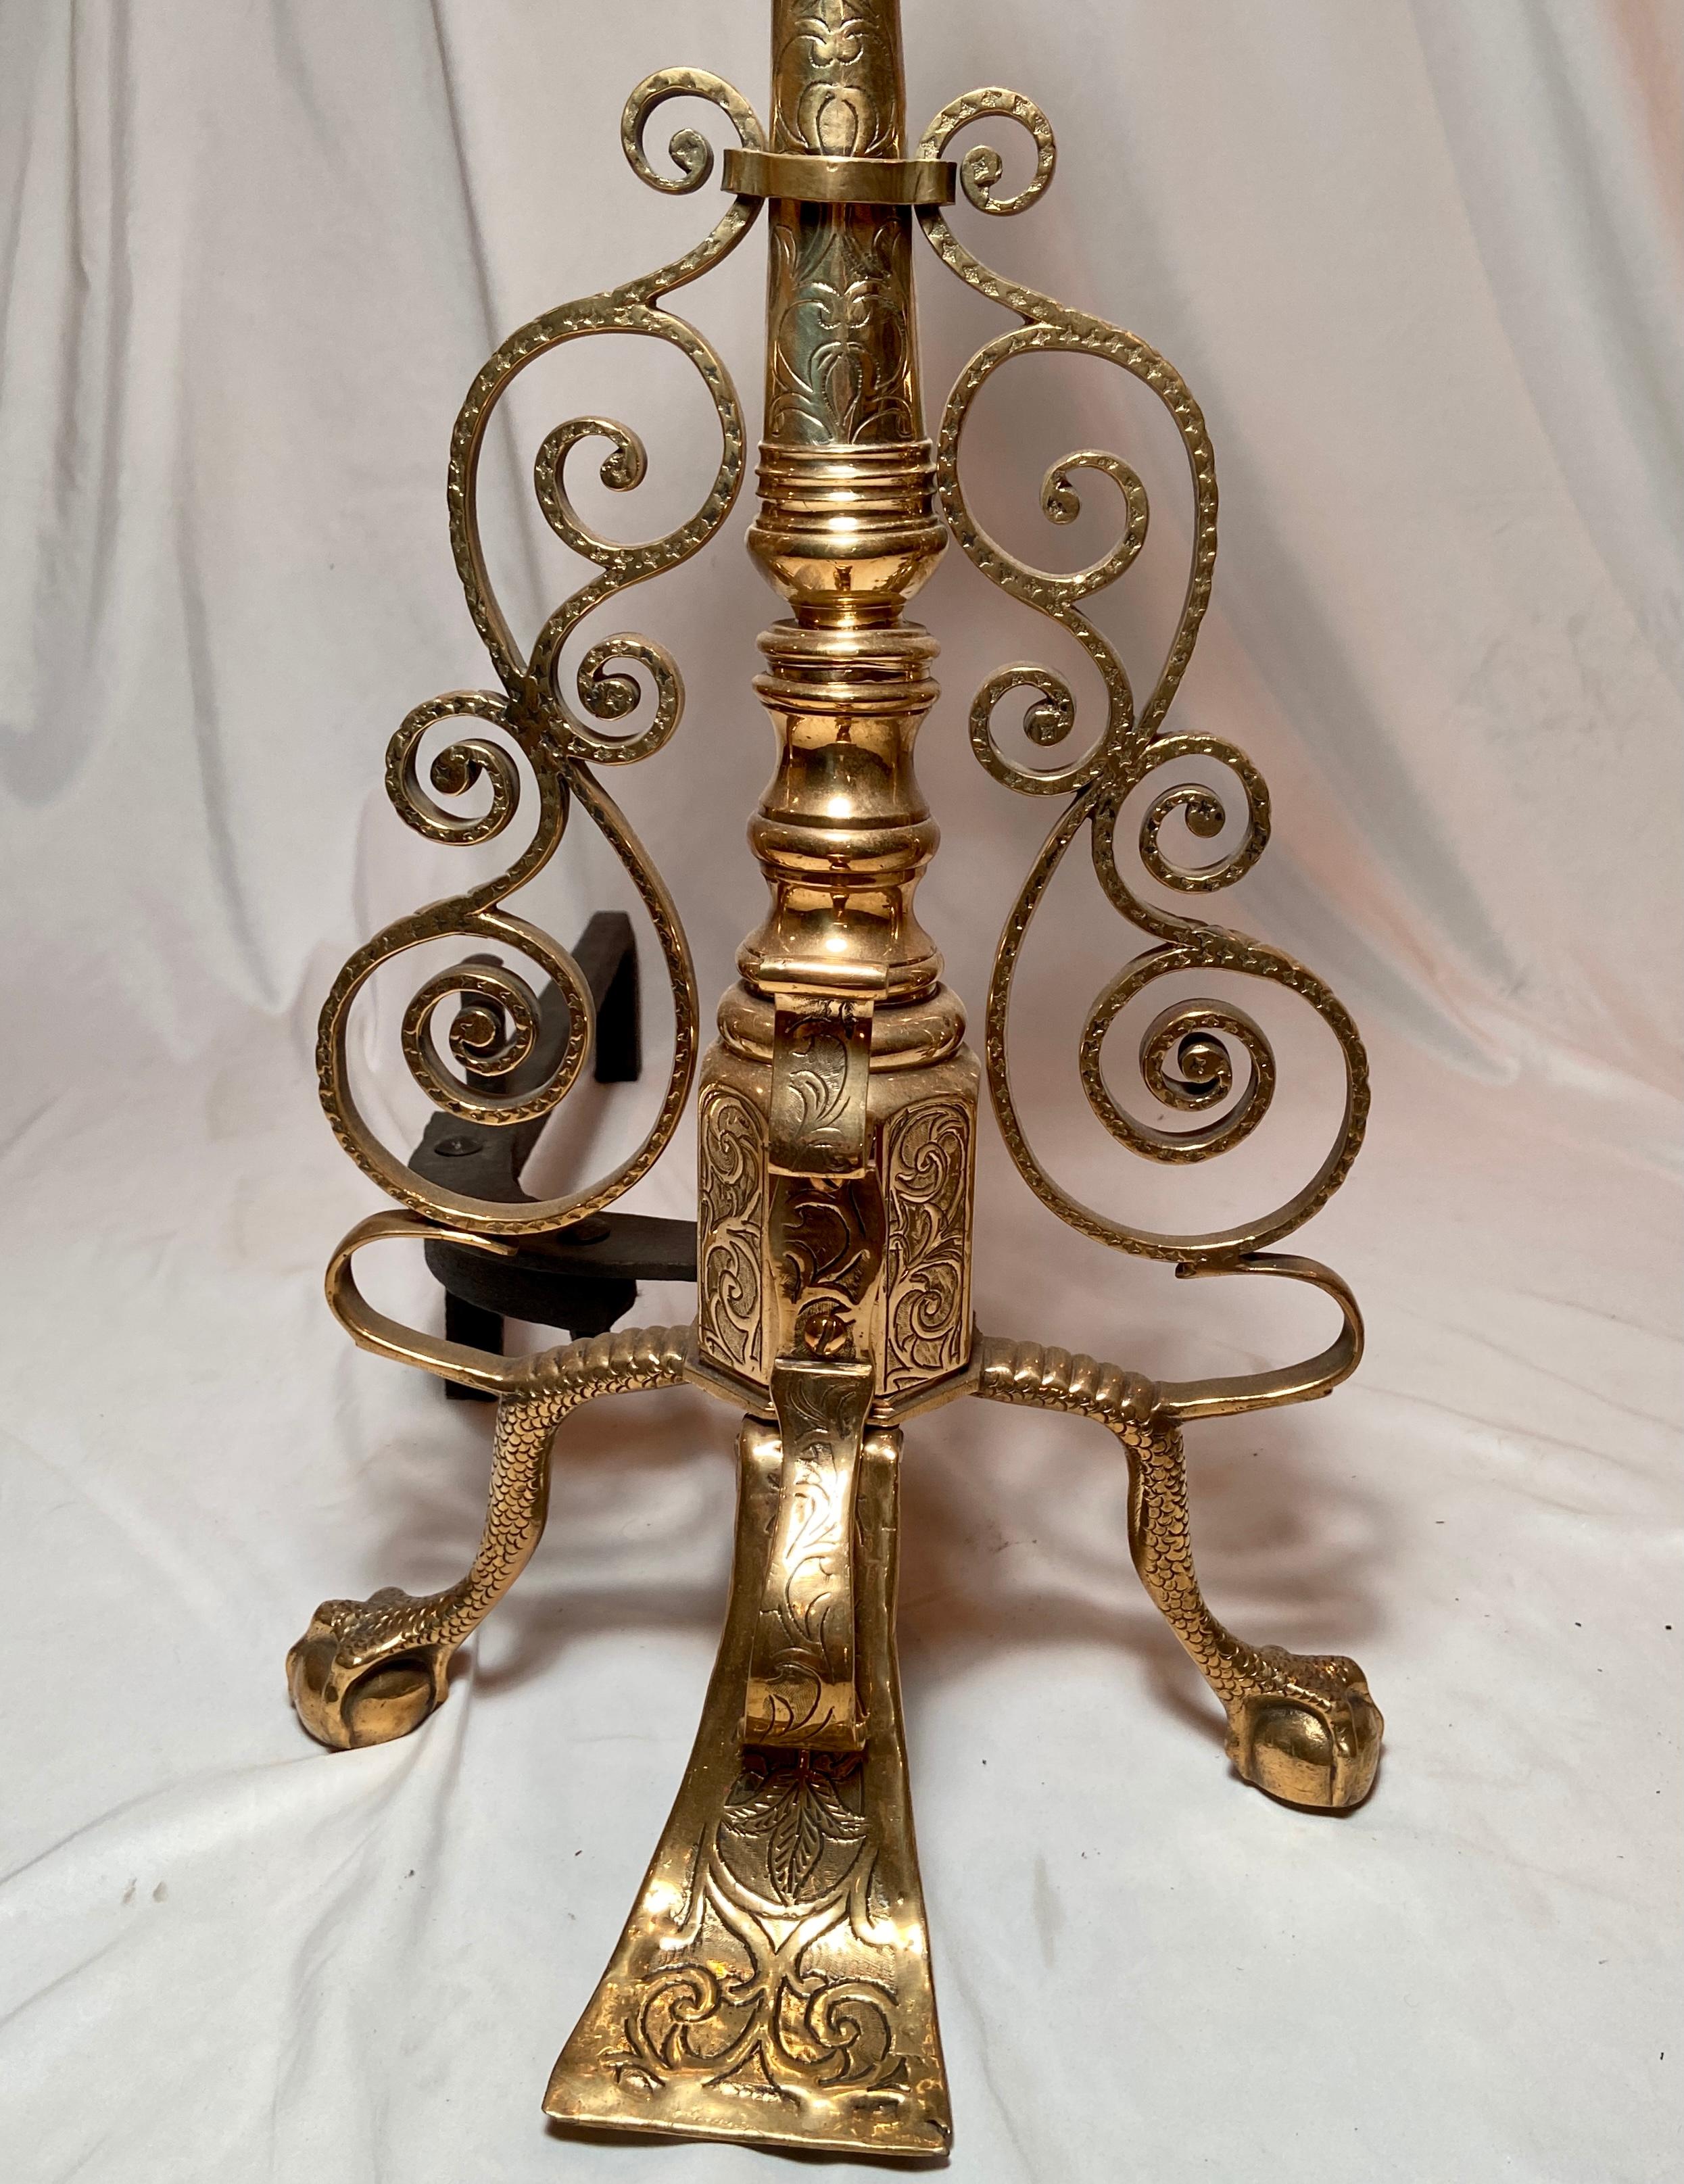 19th Century Pair Antique English Victorian Brass Andirons with Scrollwork Design, circa 1890 For Sale